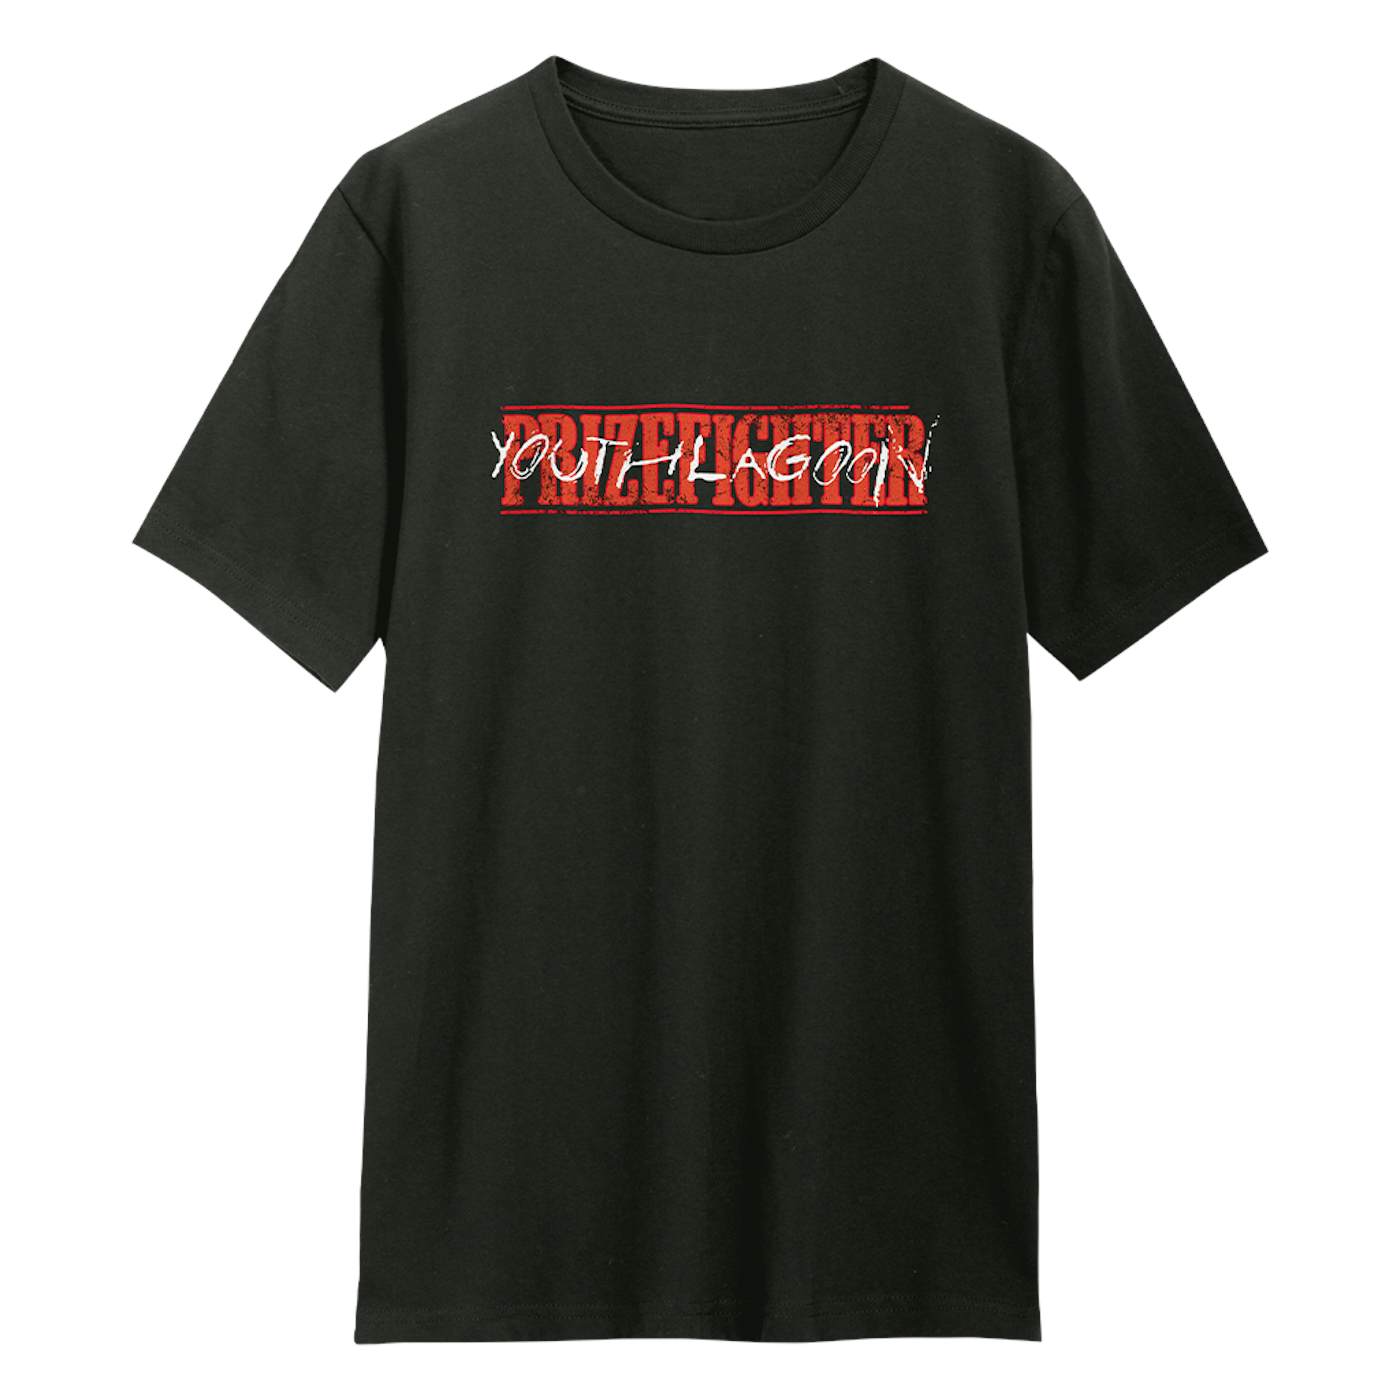 Youth Lagoon Prizefighter T-Shirt